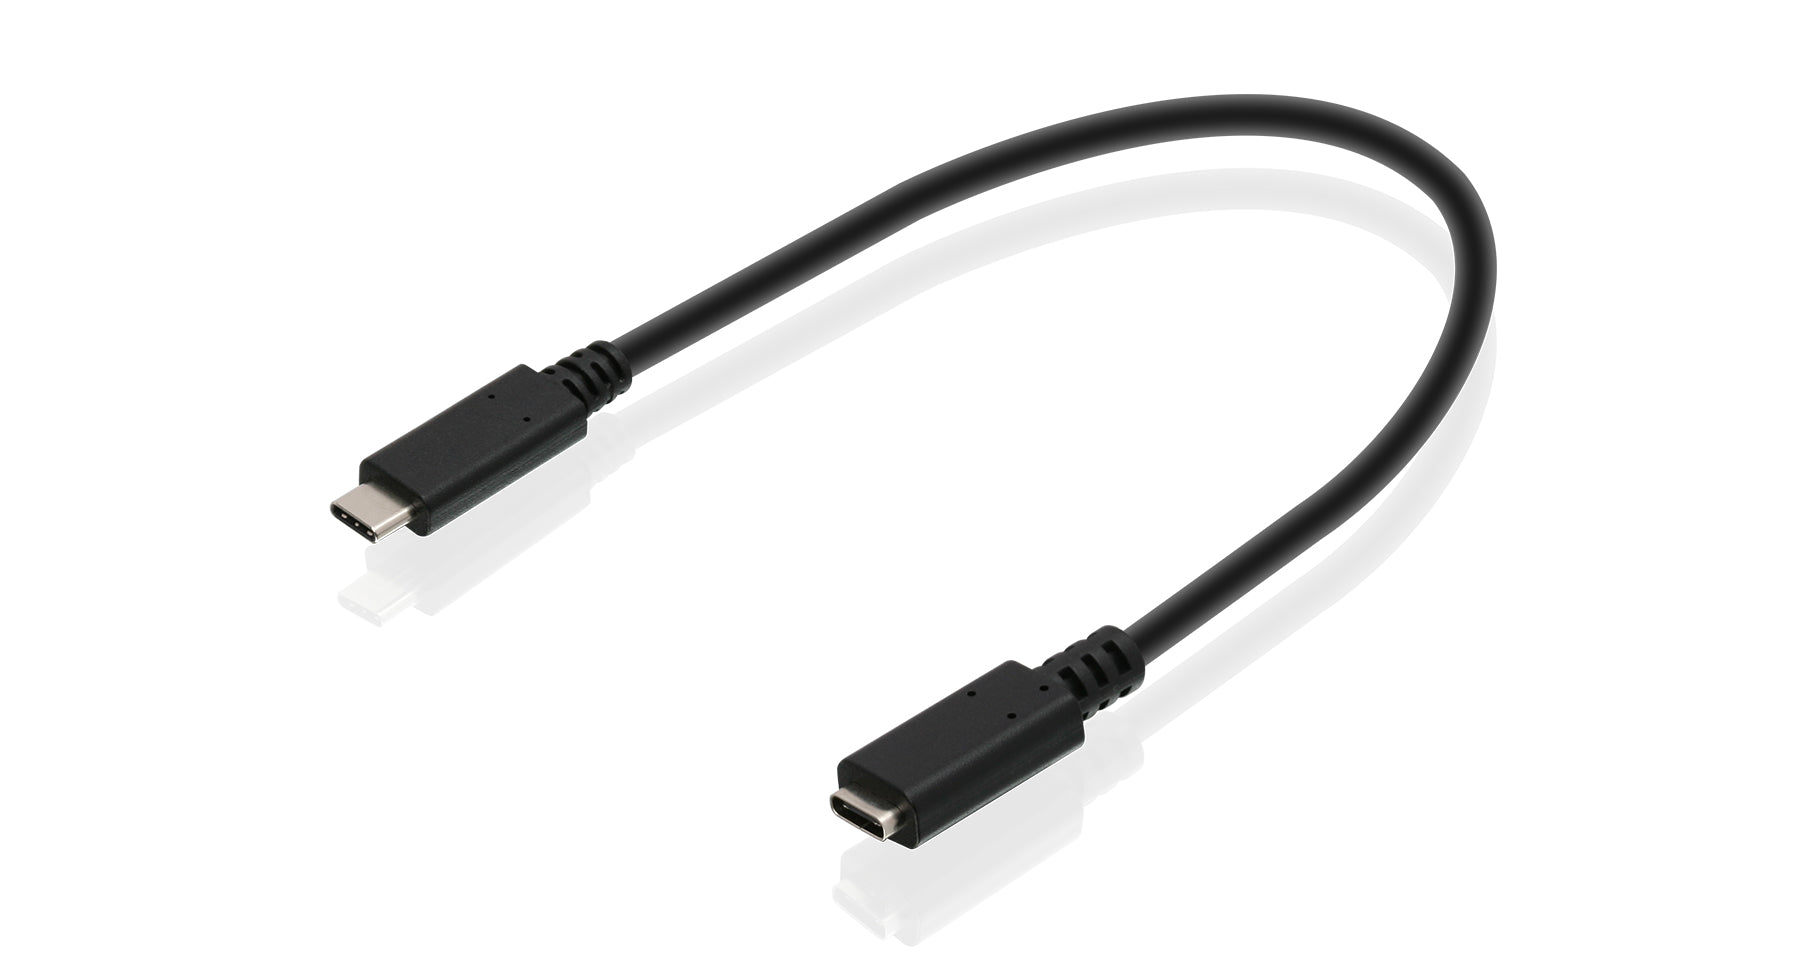 USB-C Male to Female Adapter